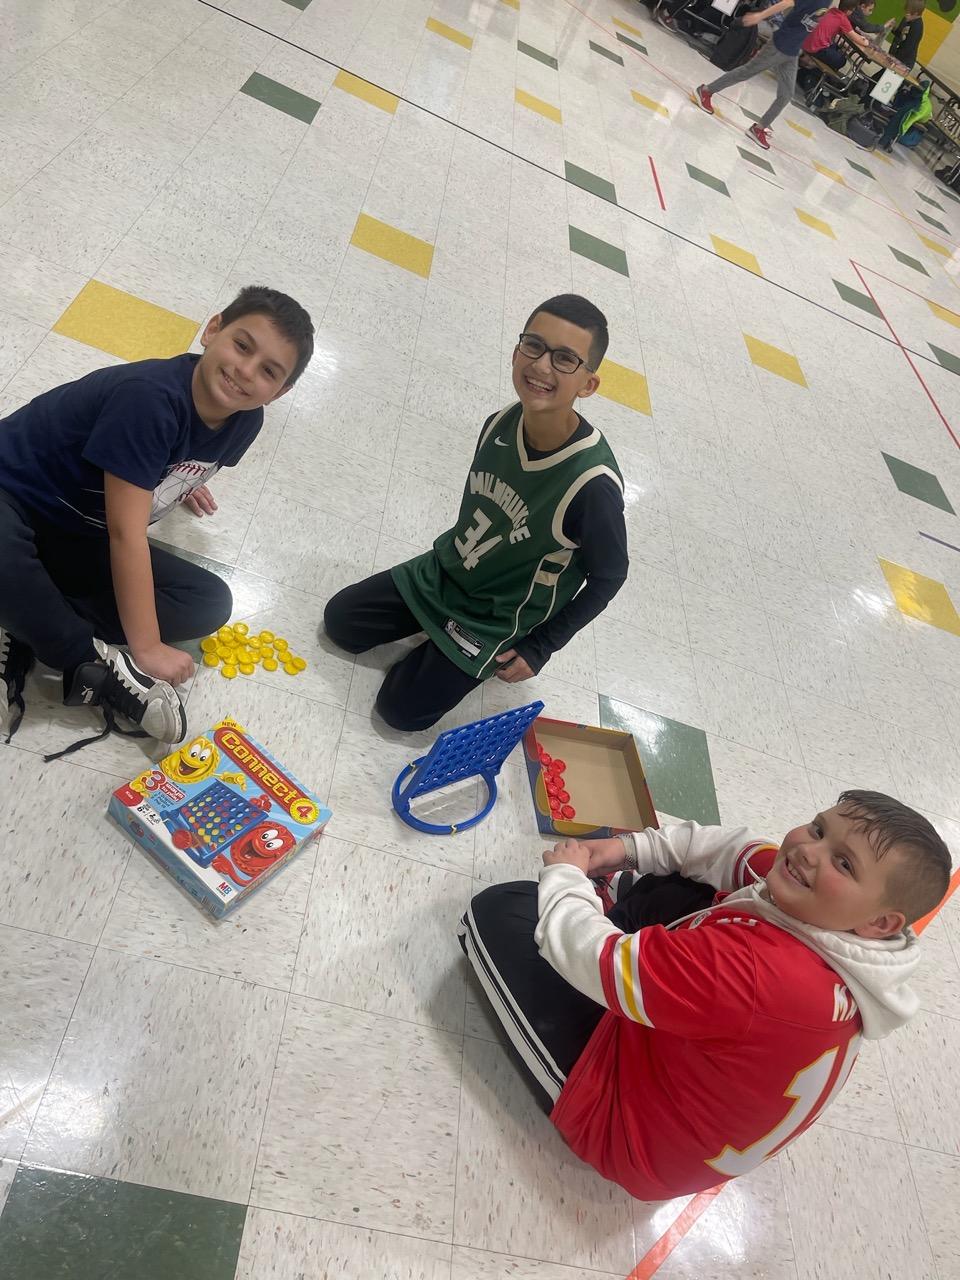 4th-graders Nico Leombruno, Liam Walker, and Cameron Kitchen enjoy a game of Connect4